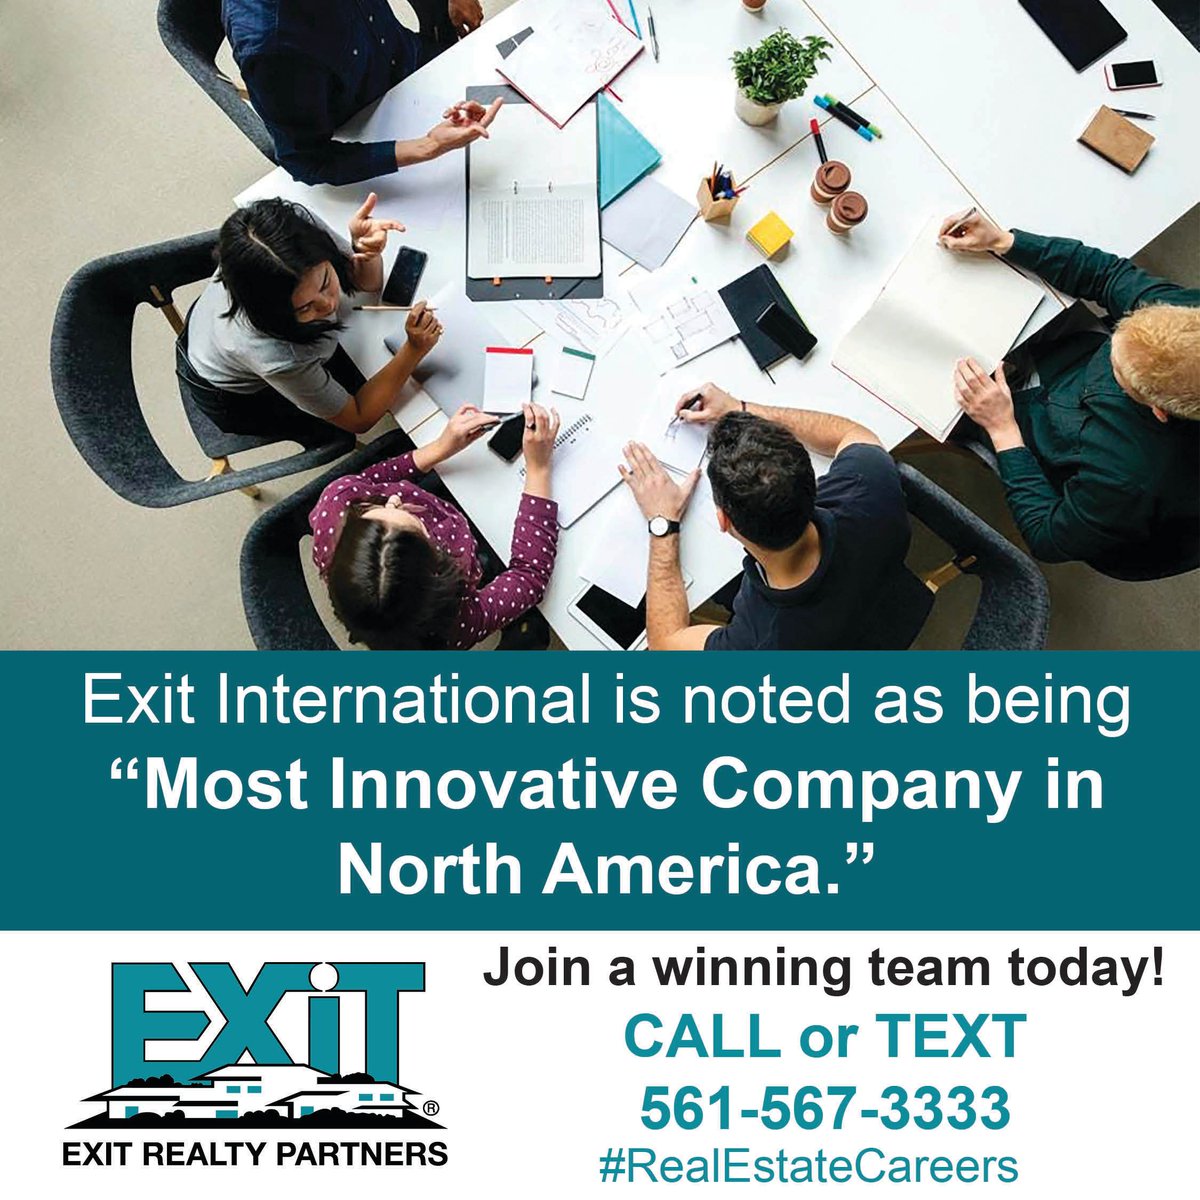 Want to join a winning, innovative team?
CALL or TEXT EXIT Realty Partners at 561-567-3333.

#realestate #Luxuryhomes #home #property #forsale #forrent #realestateagent #newhome #dreamhome #househunting #apartmenthunting #sold #homesforsale #justlisted #renovated #curbappeal...